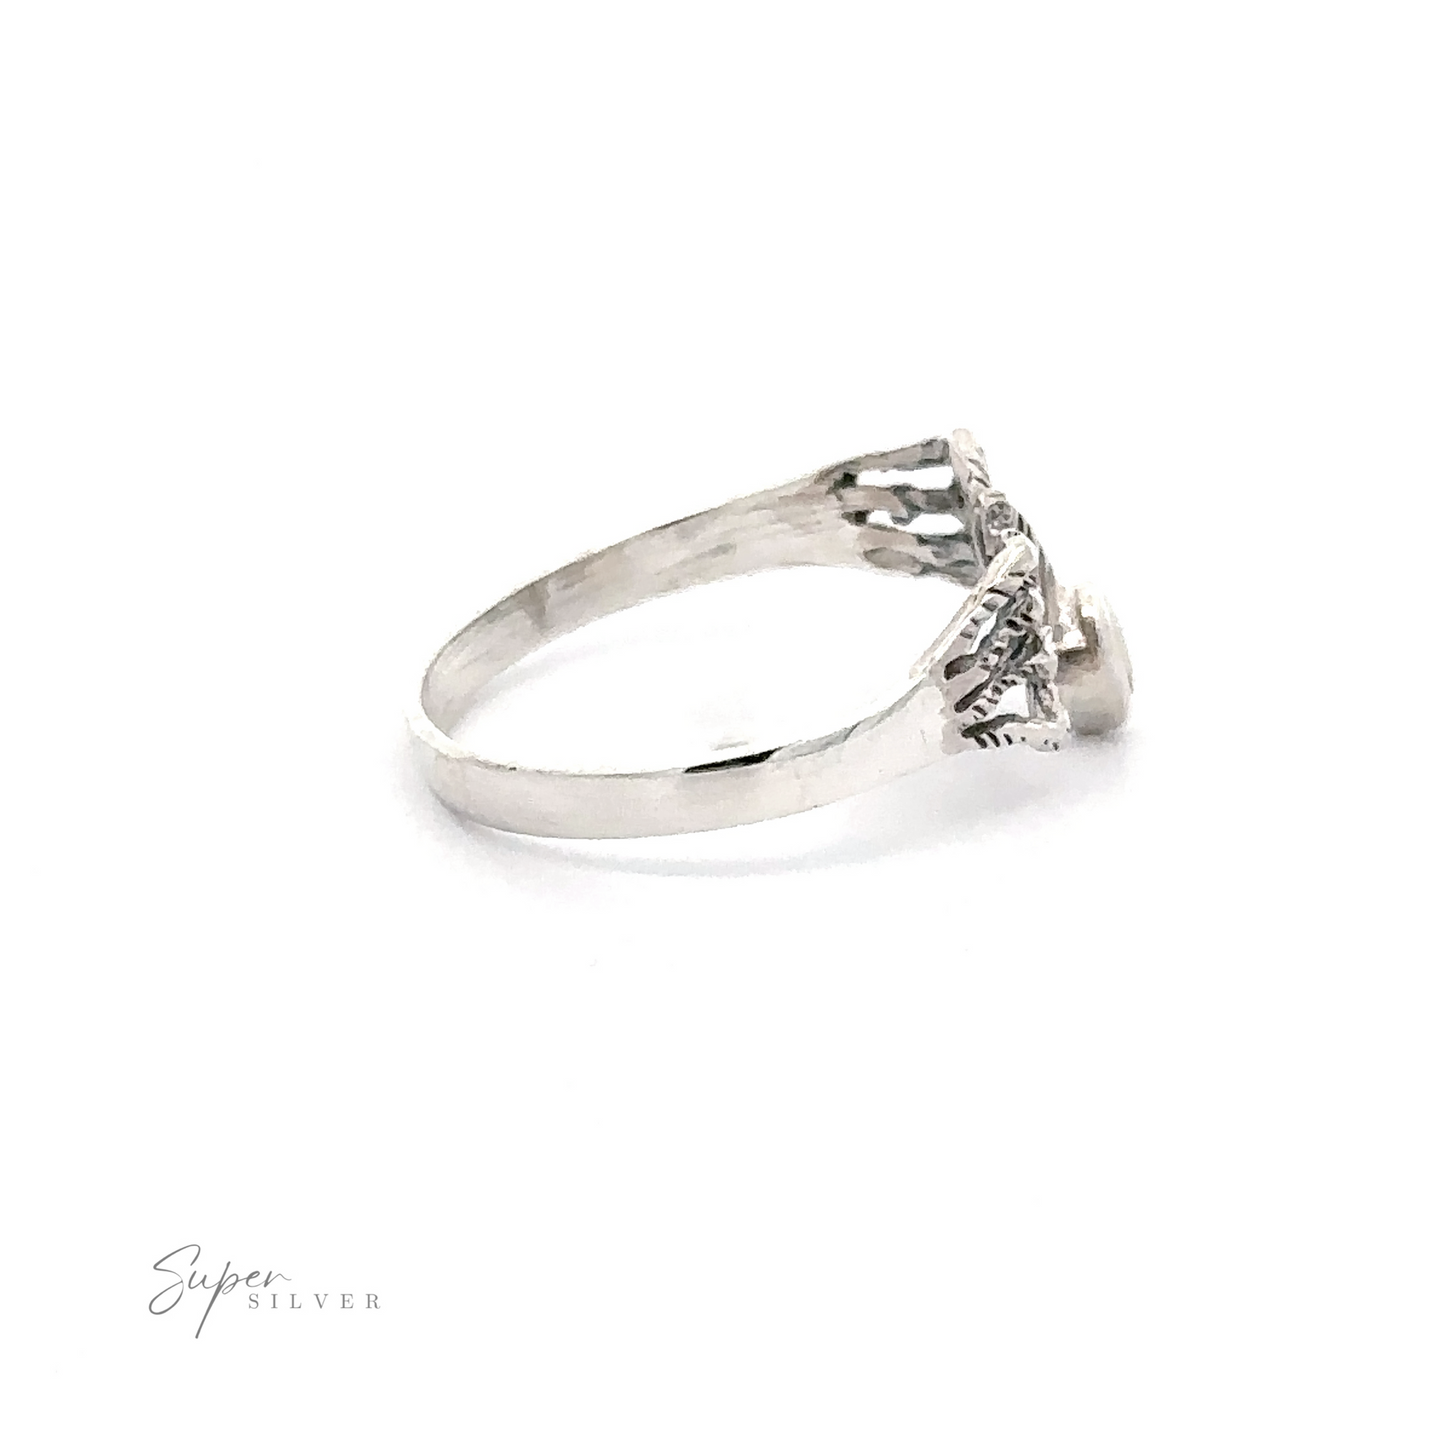 
                  
                    A Small Inlay Spider Ring with a raised, intricate setting viewed from the side, showcasing detailed craftsmanship on a plain white background. The brand "Super Silver" is visible near the bottom left corner, adding an aura of mystical jewelry.
                  
                